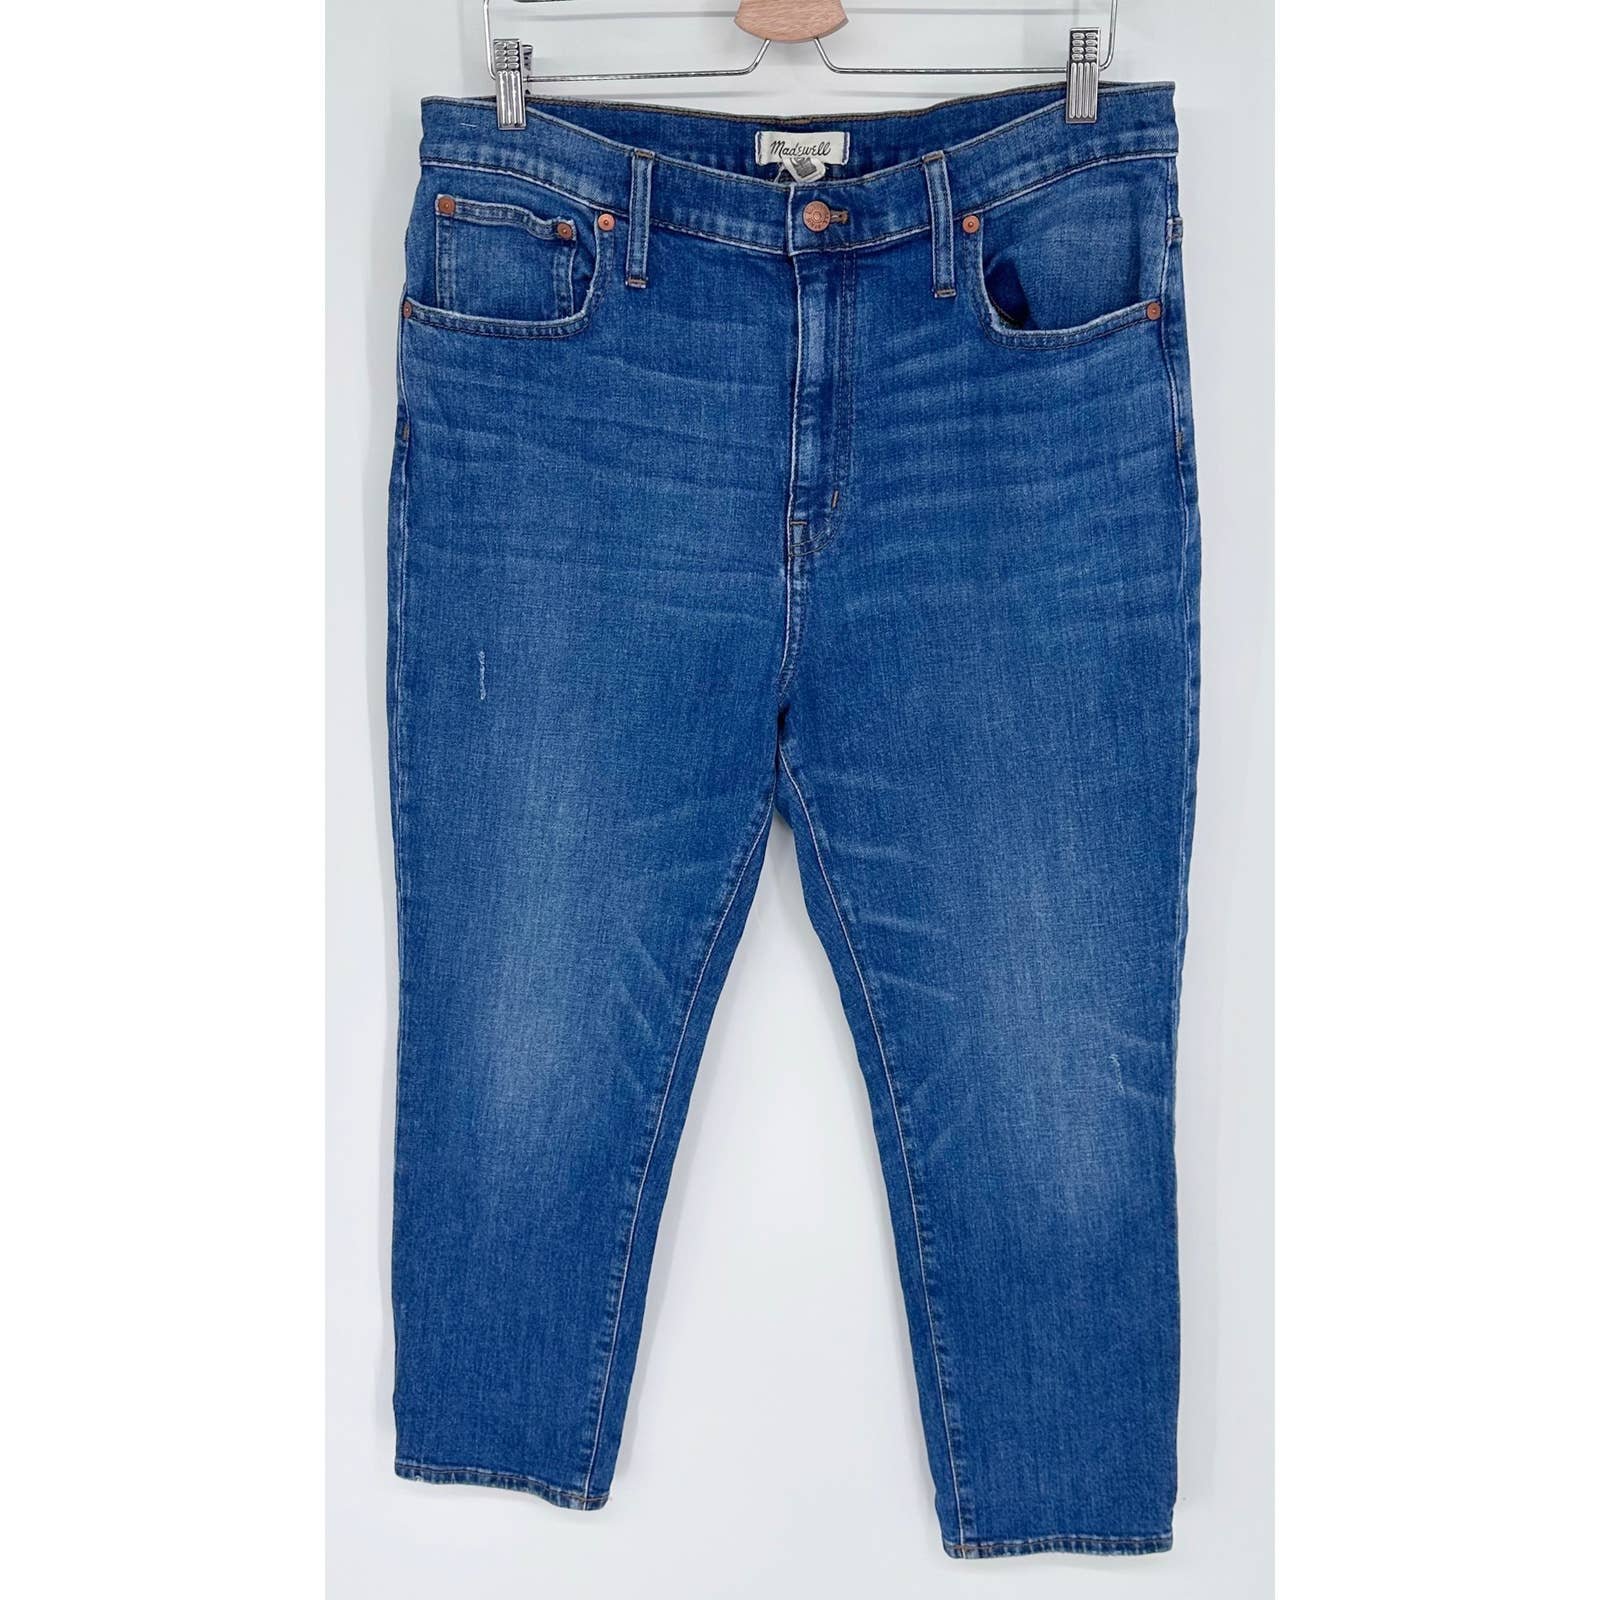 save up to 70% Madewell Women´s Blue The High-Rise Slim Boyjean High-Rise Pockets Whiskering NiPIA77H2 Discount